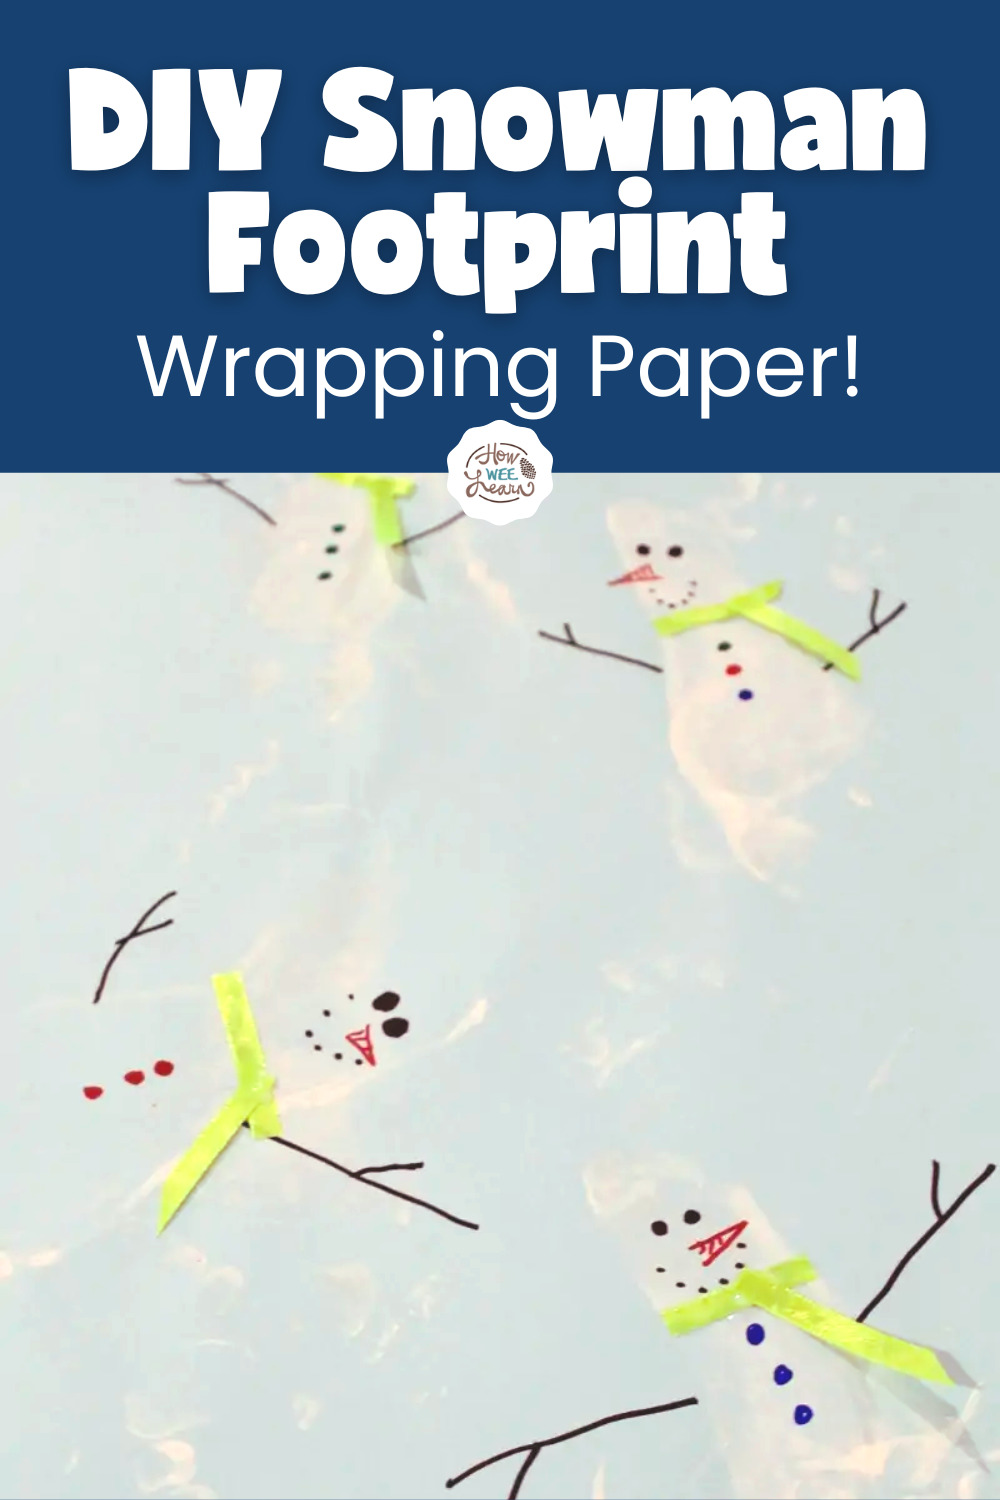 DIY Snowman Footprint Wrapping Paper, a Christmas Craft for Preschoolers